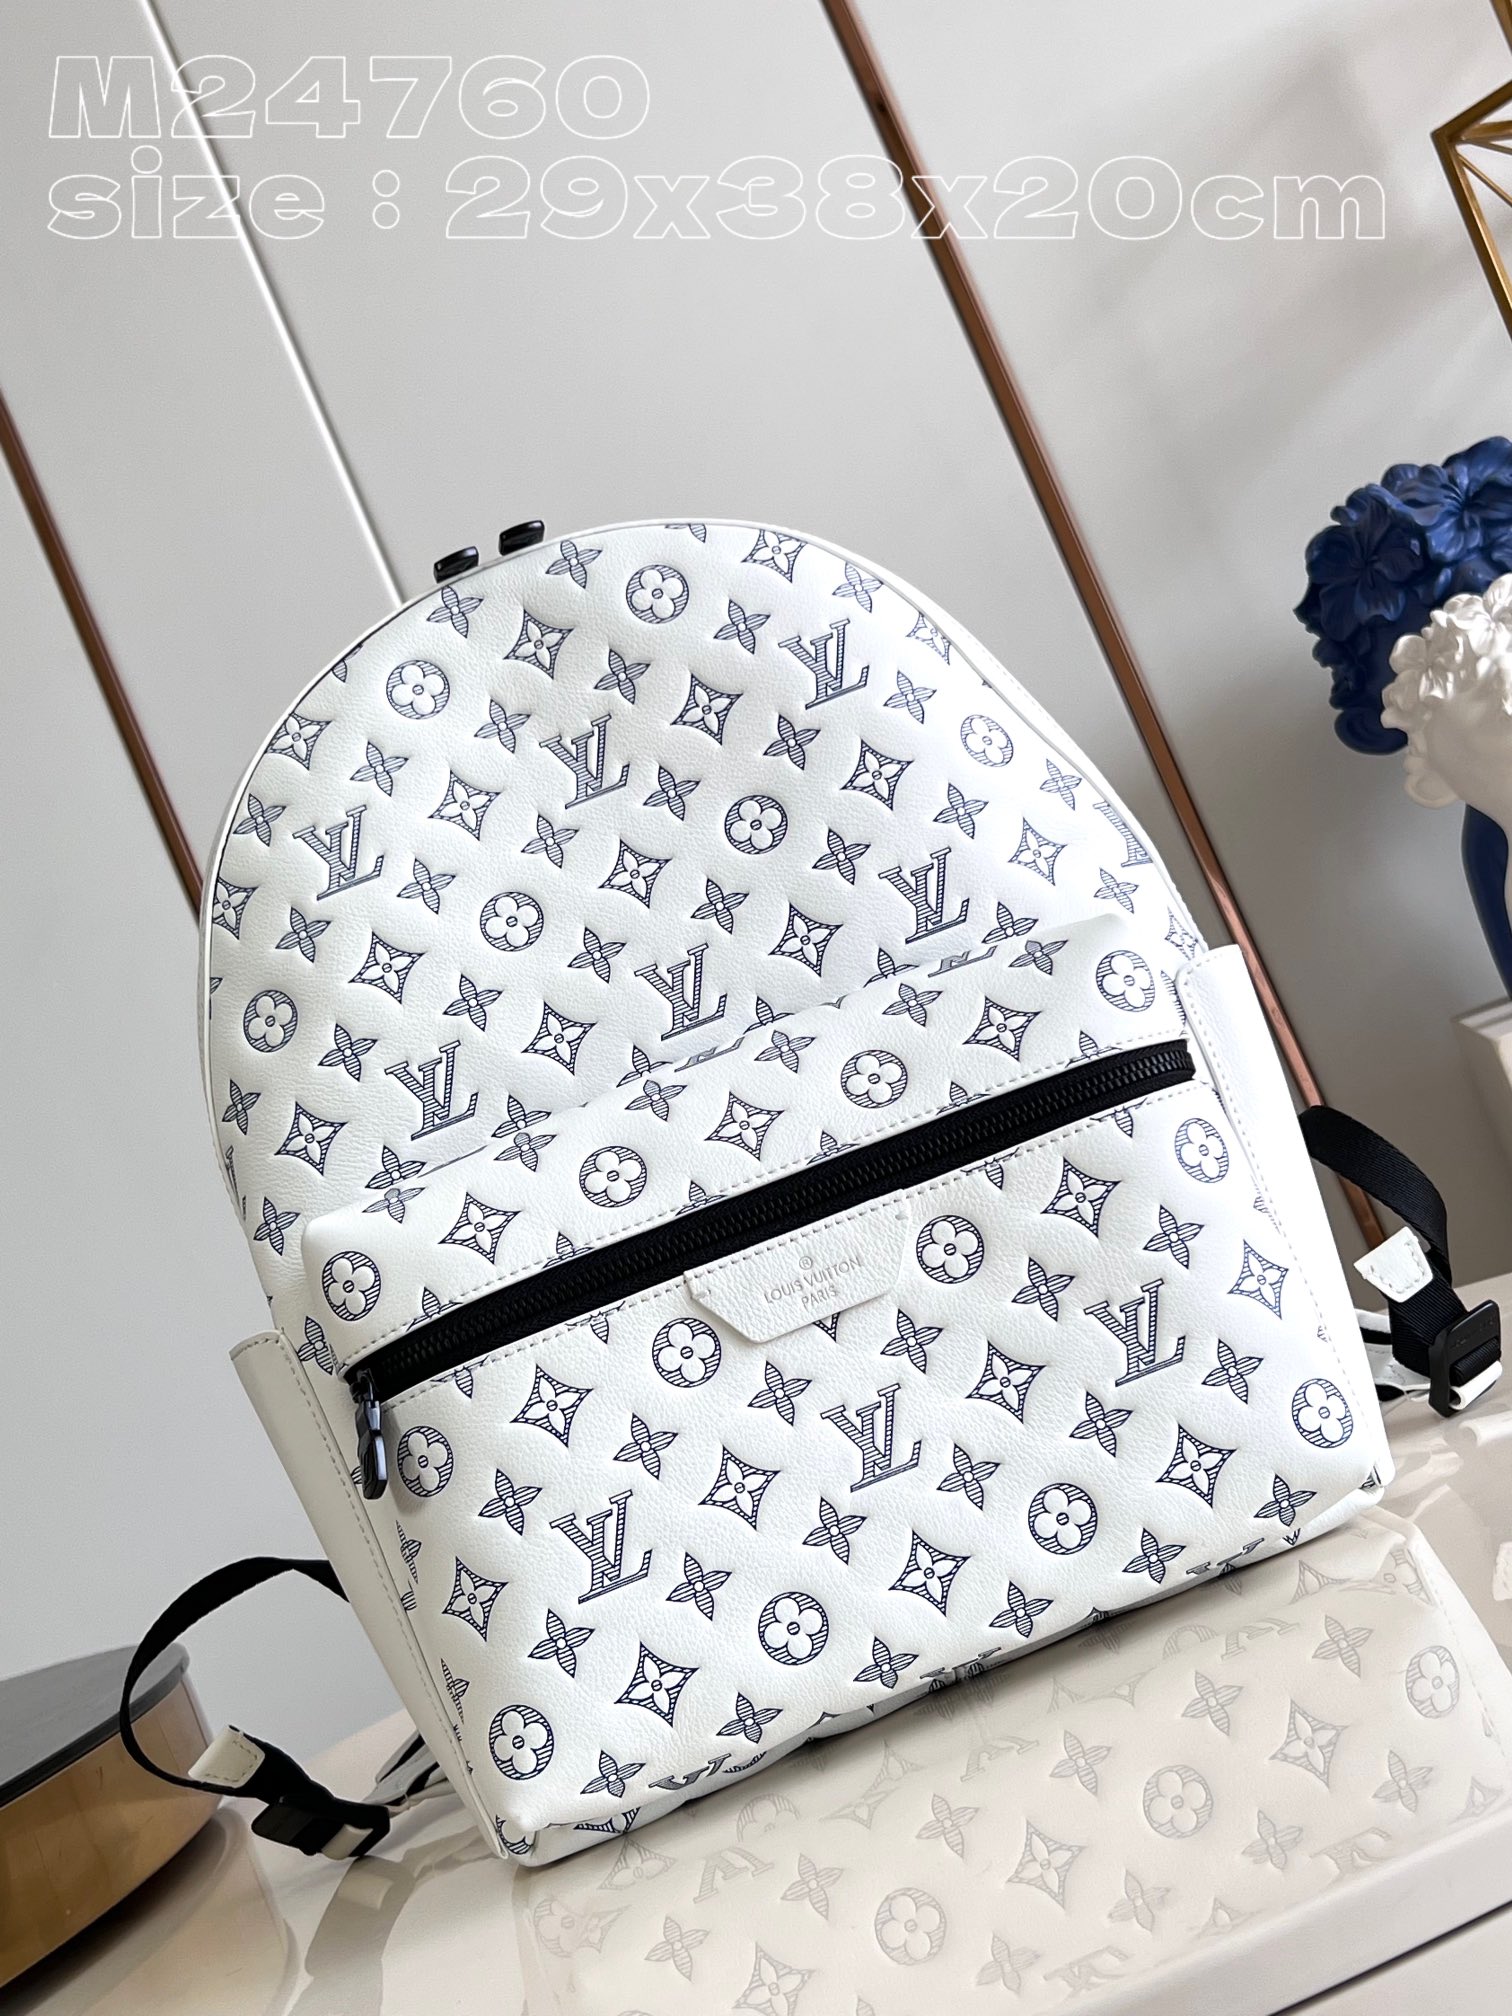 Louis Vuitton LV Discovery Bags Backpack White Printing M24760